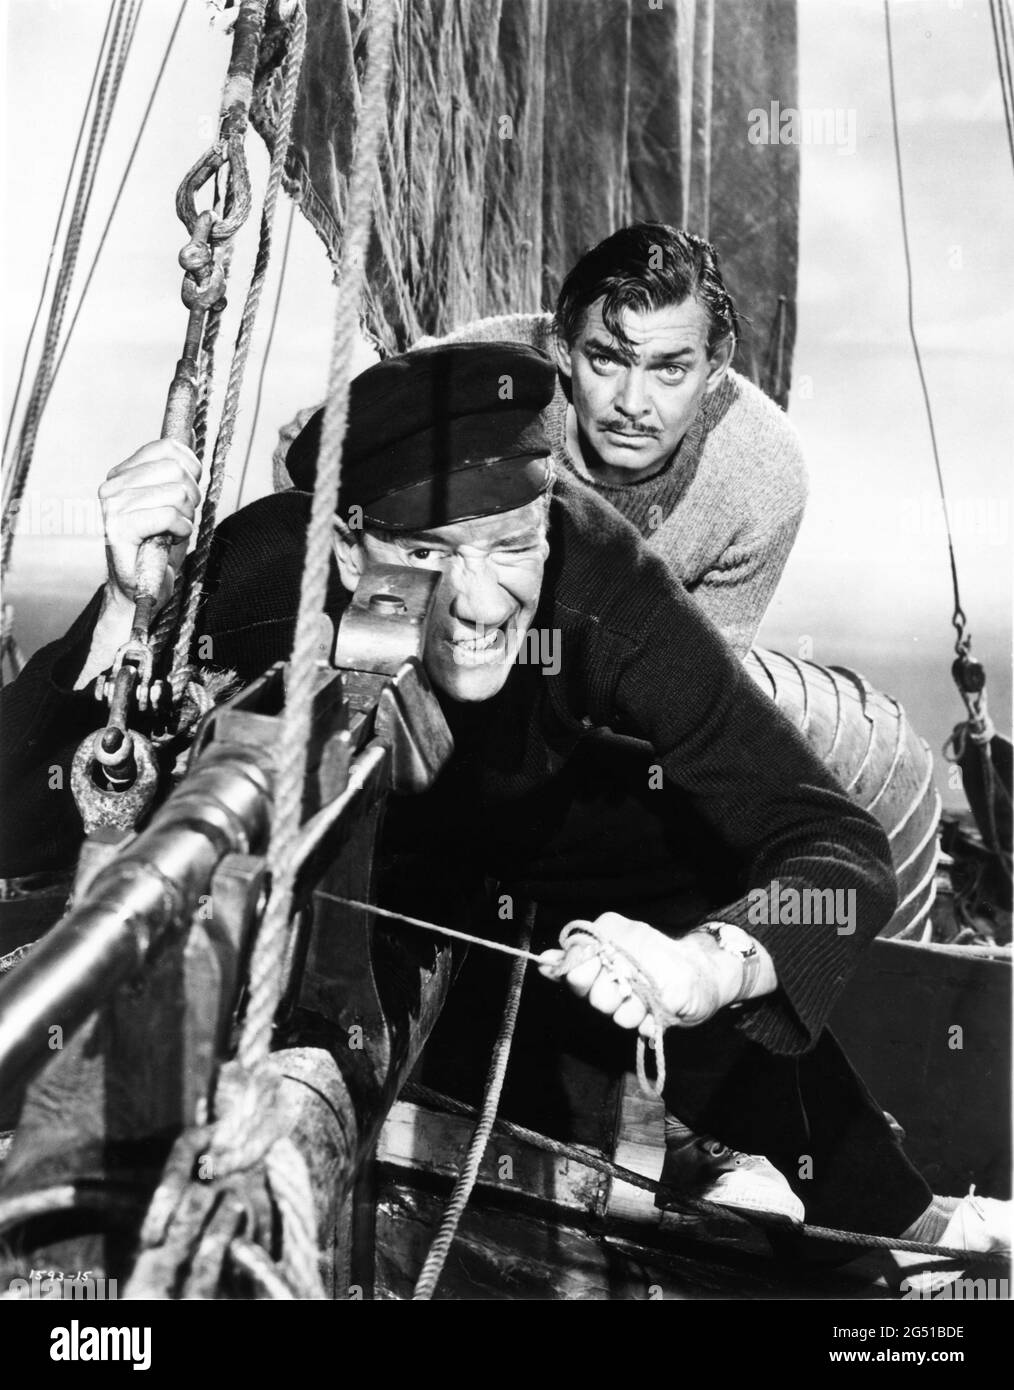 RICHARD HAYDEN and CLARK GABLE in NEVER LET ME GO 1953 director DELMER DAVES from novel Come The Dawn by Paul Winterton producer Clarence Brown Metro Goldwyn Mayer Stock Photo